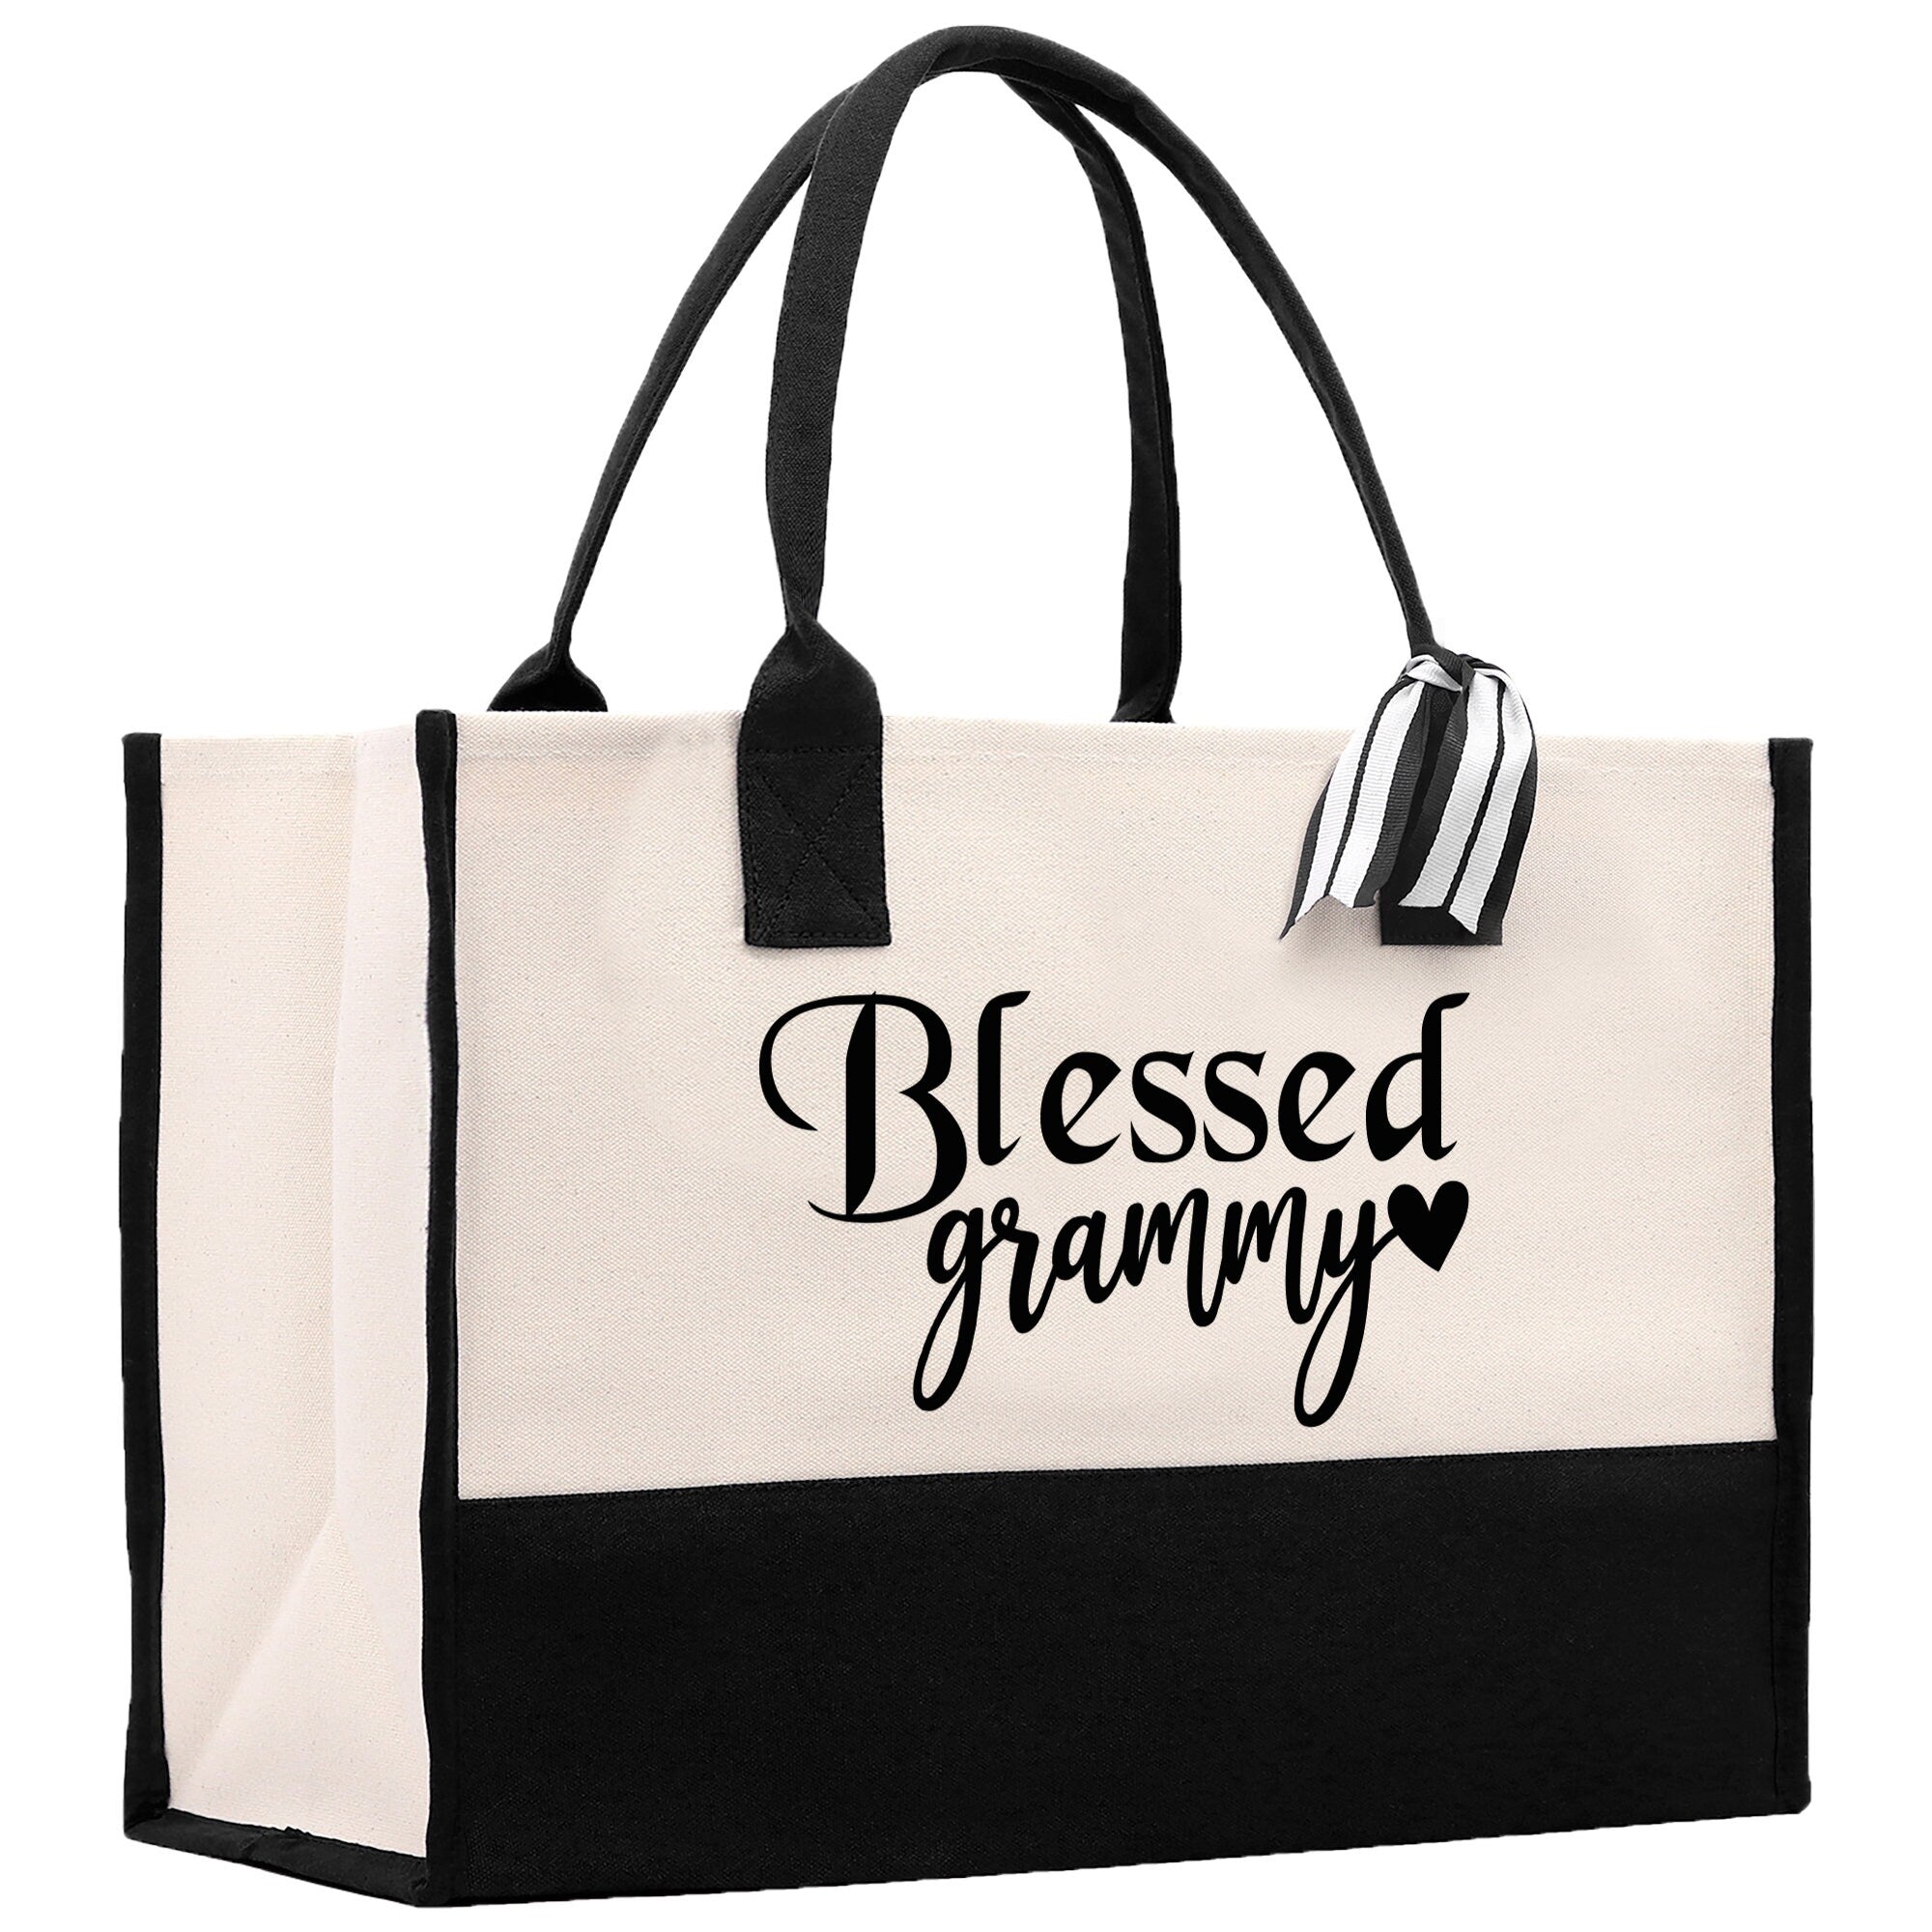 a black and white bag with a message on it